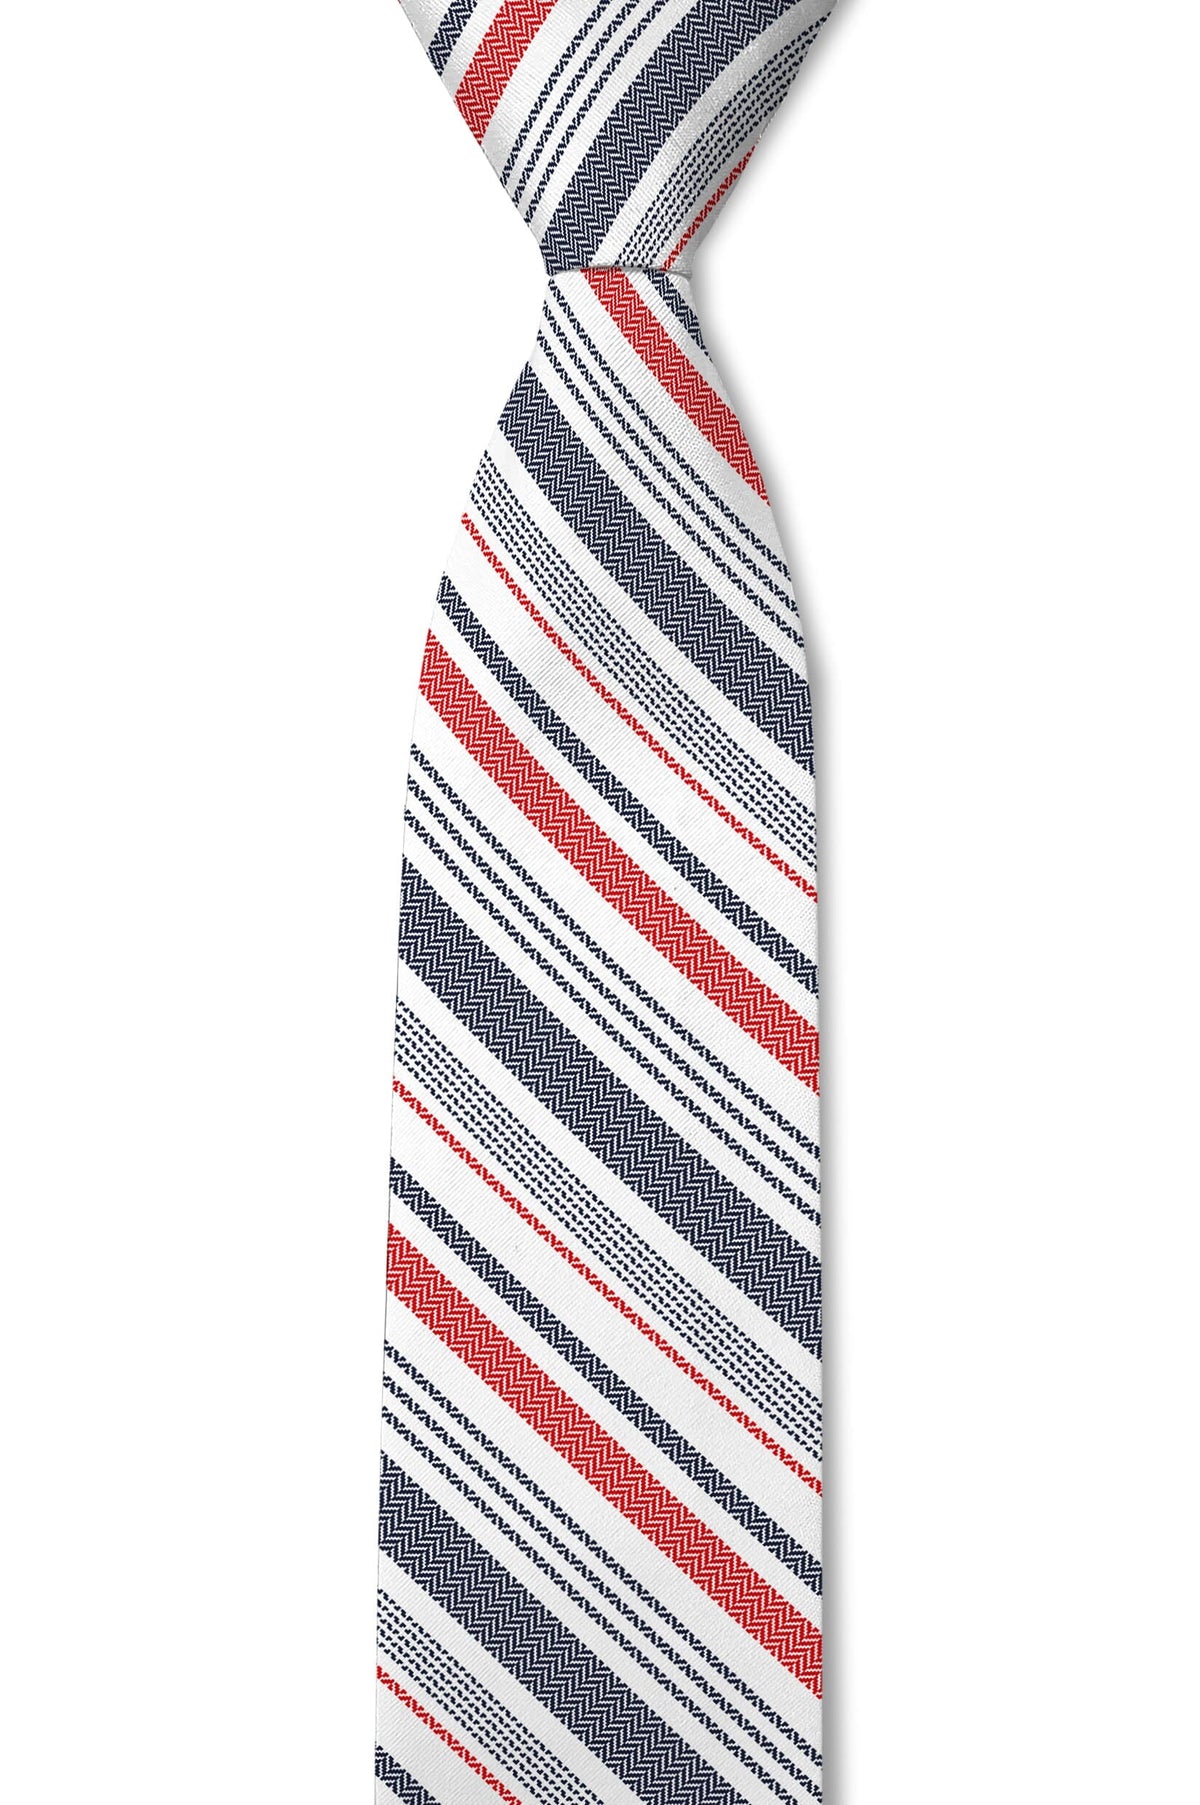 Pitcher – Textured Red White and Blue Striped Tie – Tough Apparel